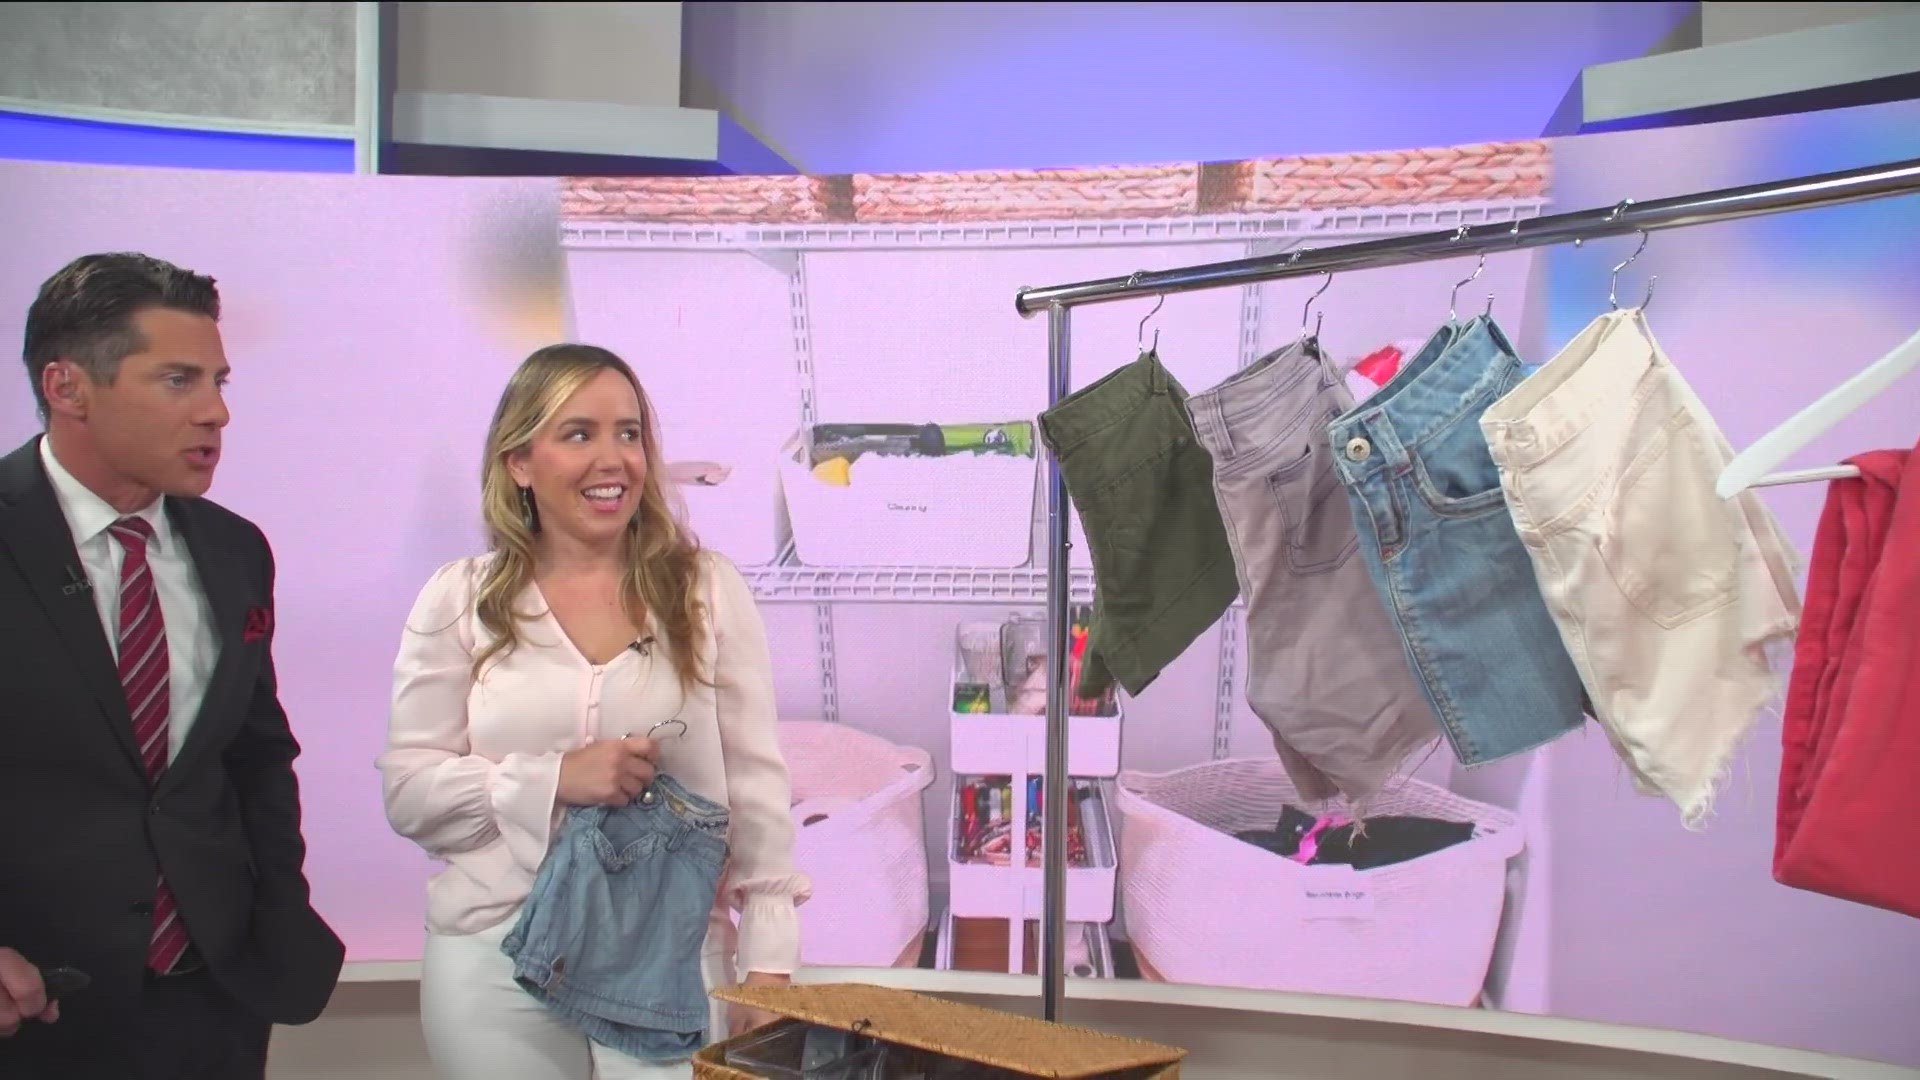 Ryen Toft talked about different storage solutions for common household items and how you can repurpose other things to make your life easier.